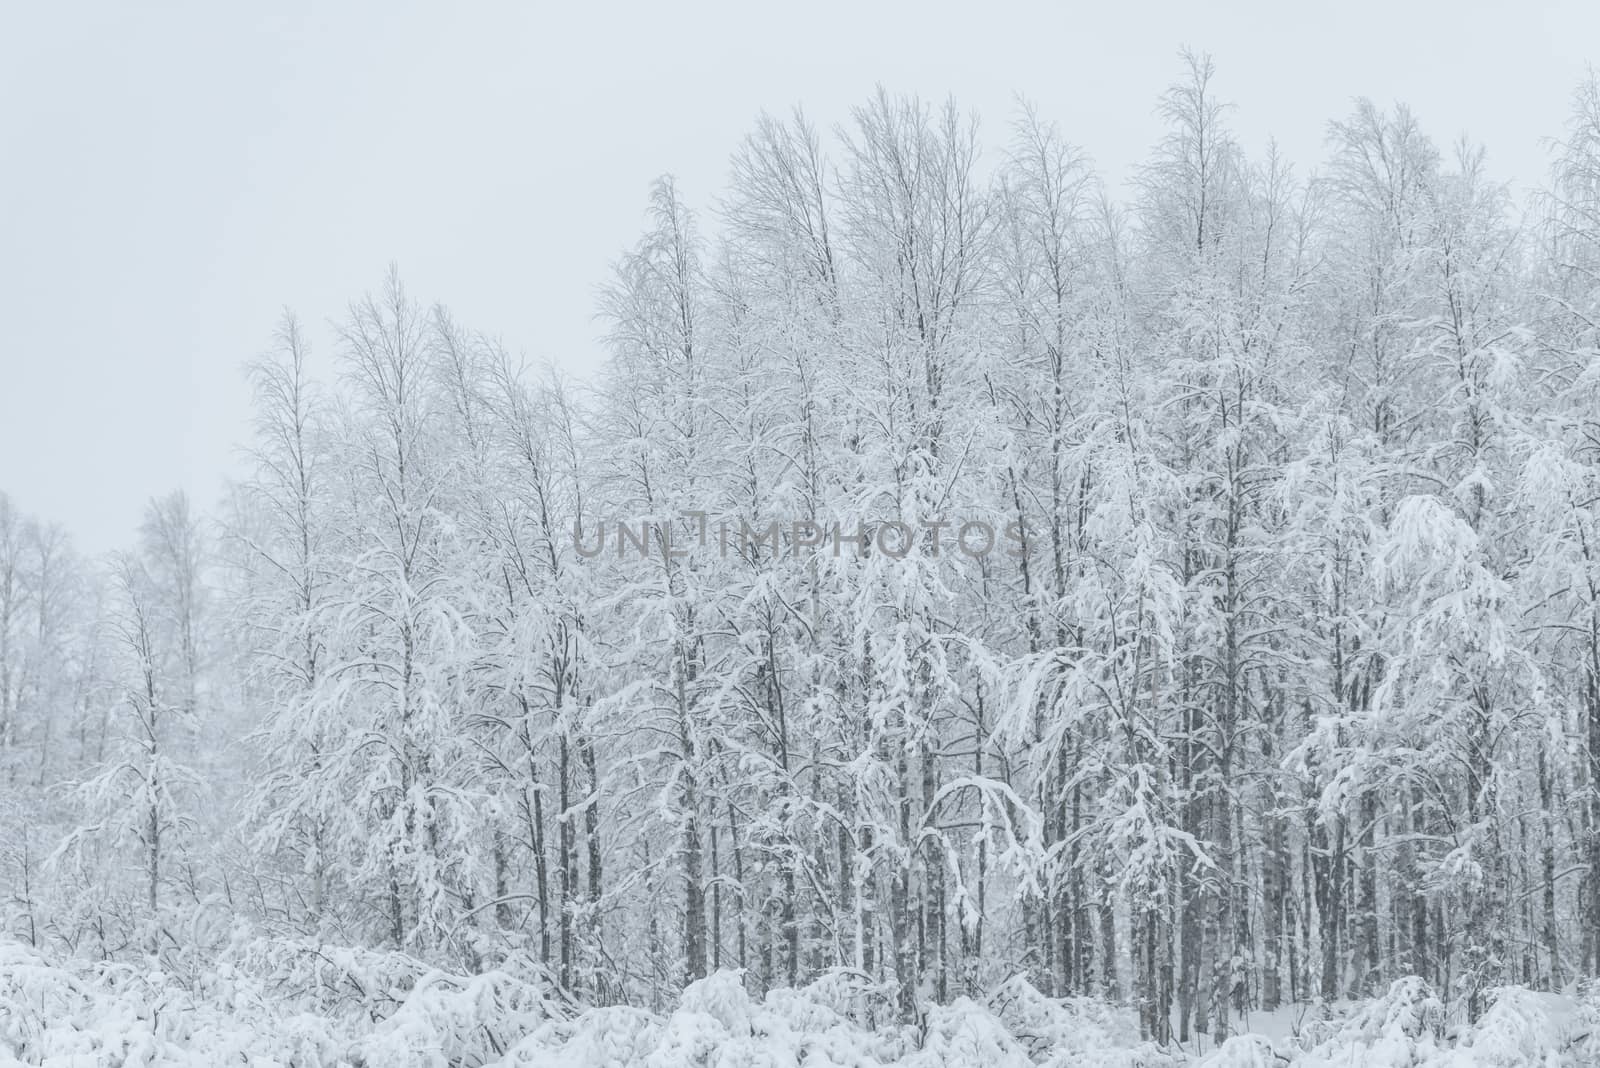 The forest has covered with heavy snow and bad weather sky in winter season at Holiday Village Kuukiuru, Finland.